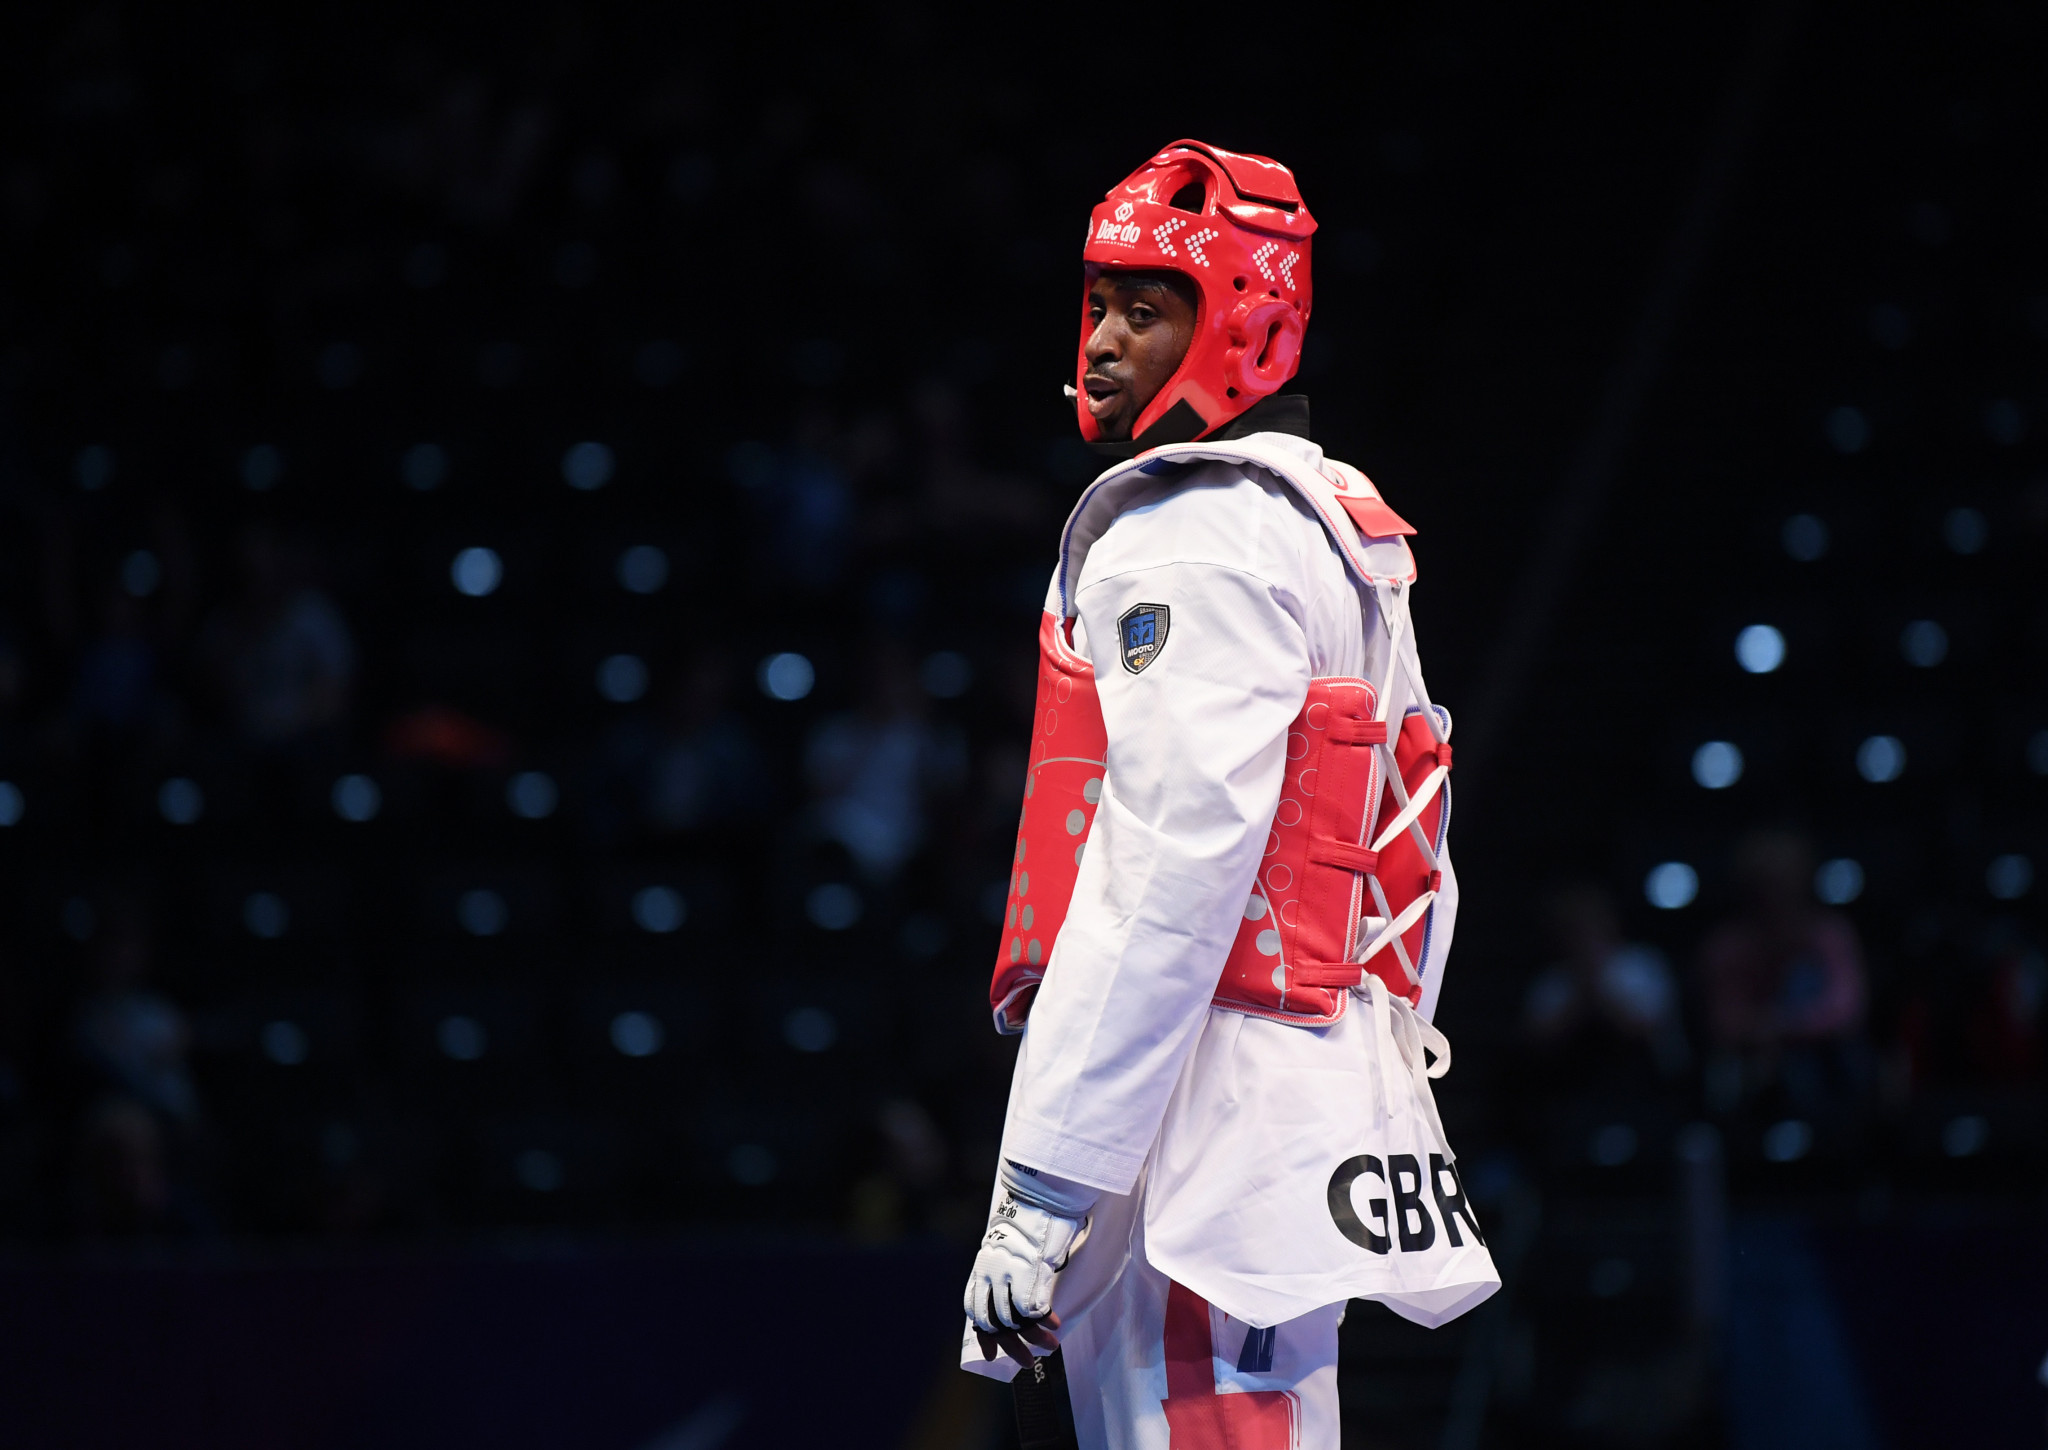 British taekwondo star Mahama Cho revealed he is "more hungry" for next year's Olympic Games in Tokyo ©Getty Images